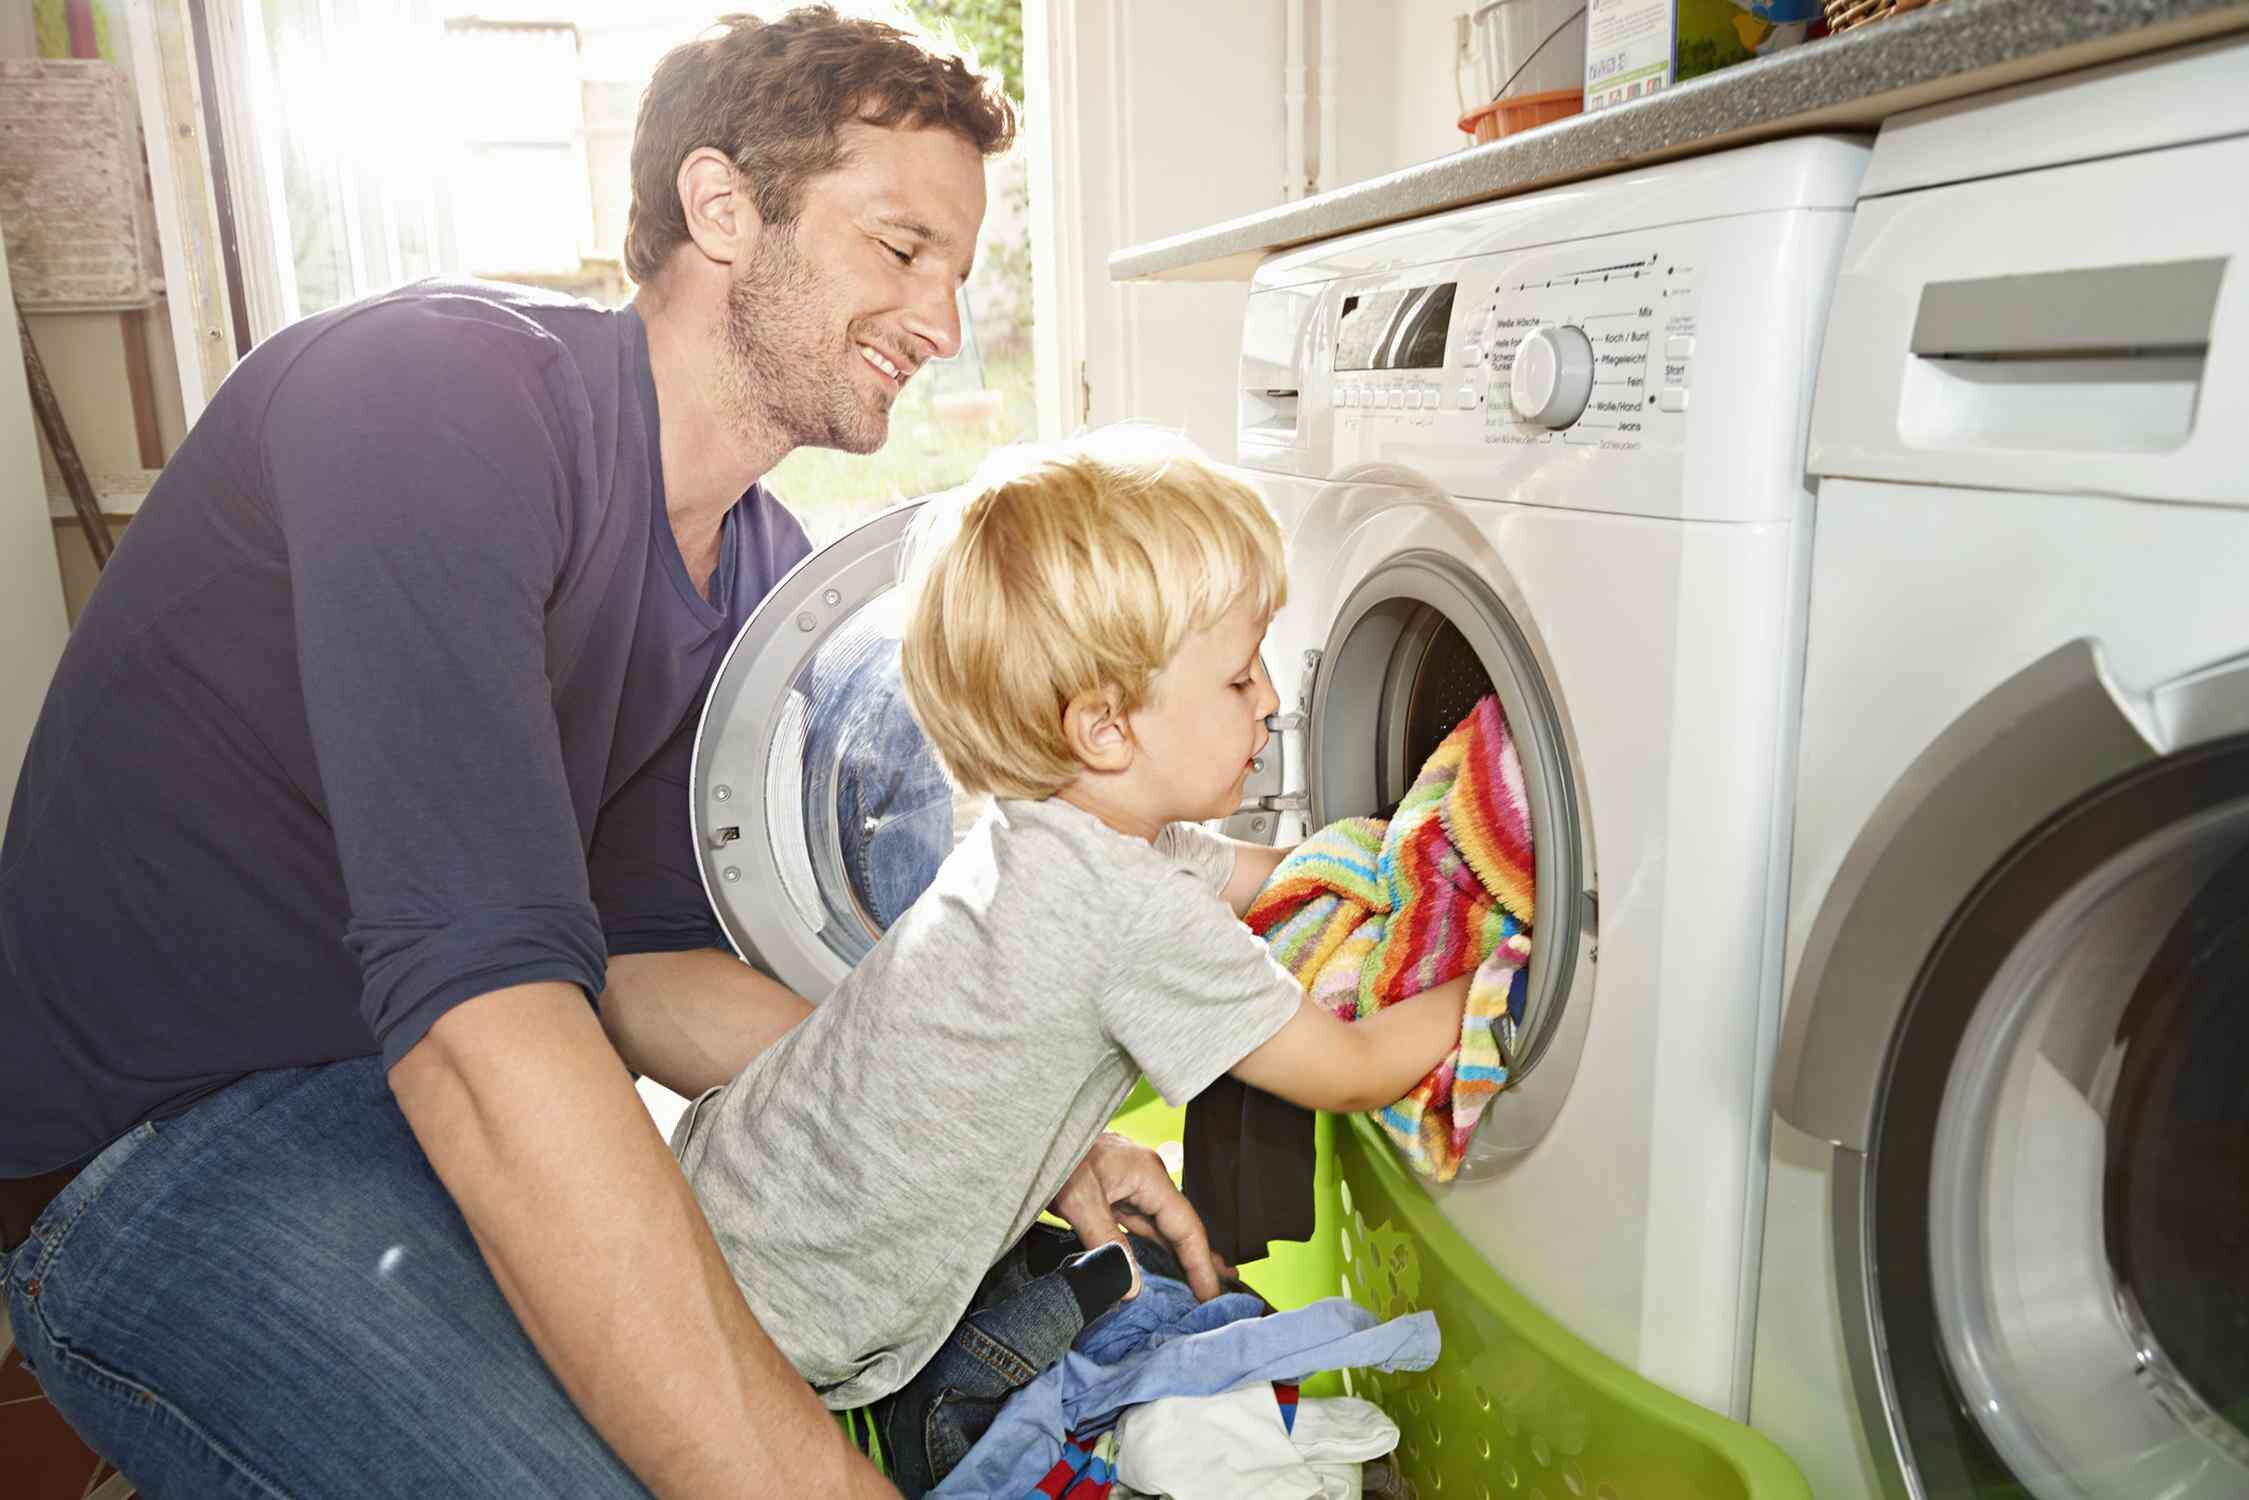 Father and child doing laundry